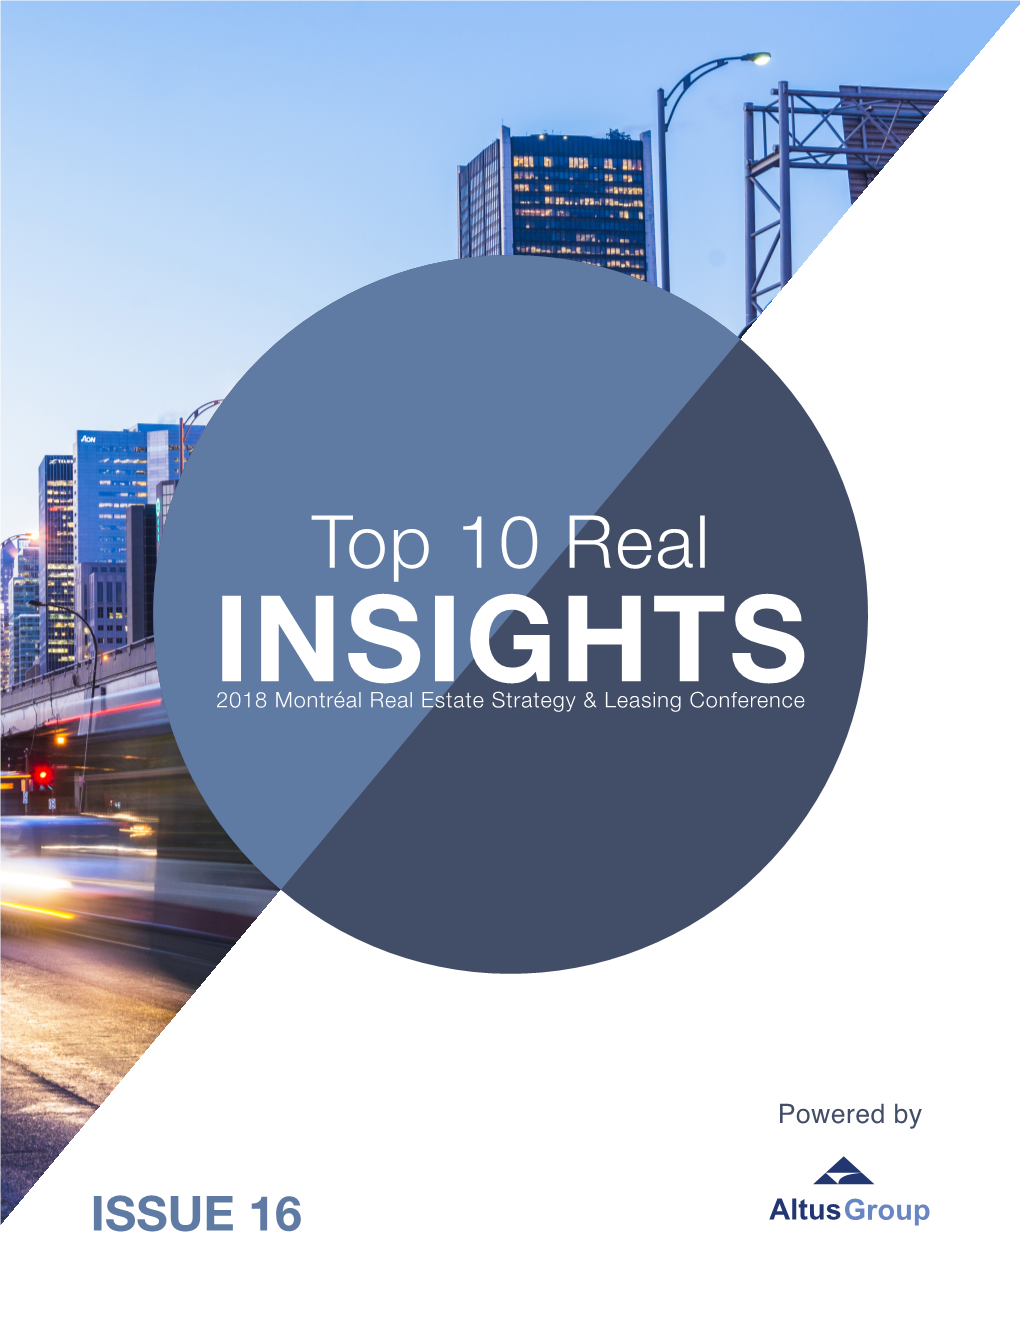 Top 10 Real INSIGHTS 2018 Montréal Real Estate Strategy & Leasing Conference